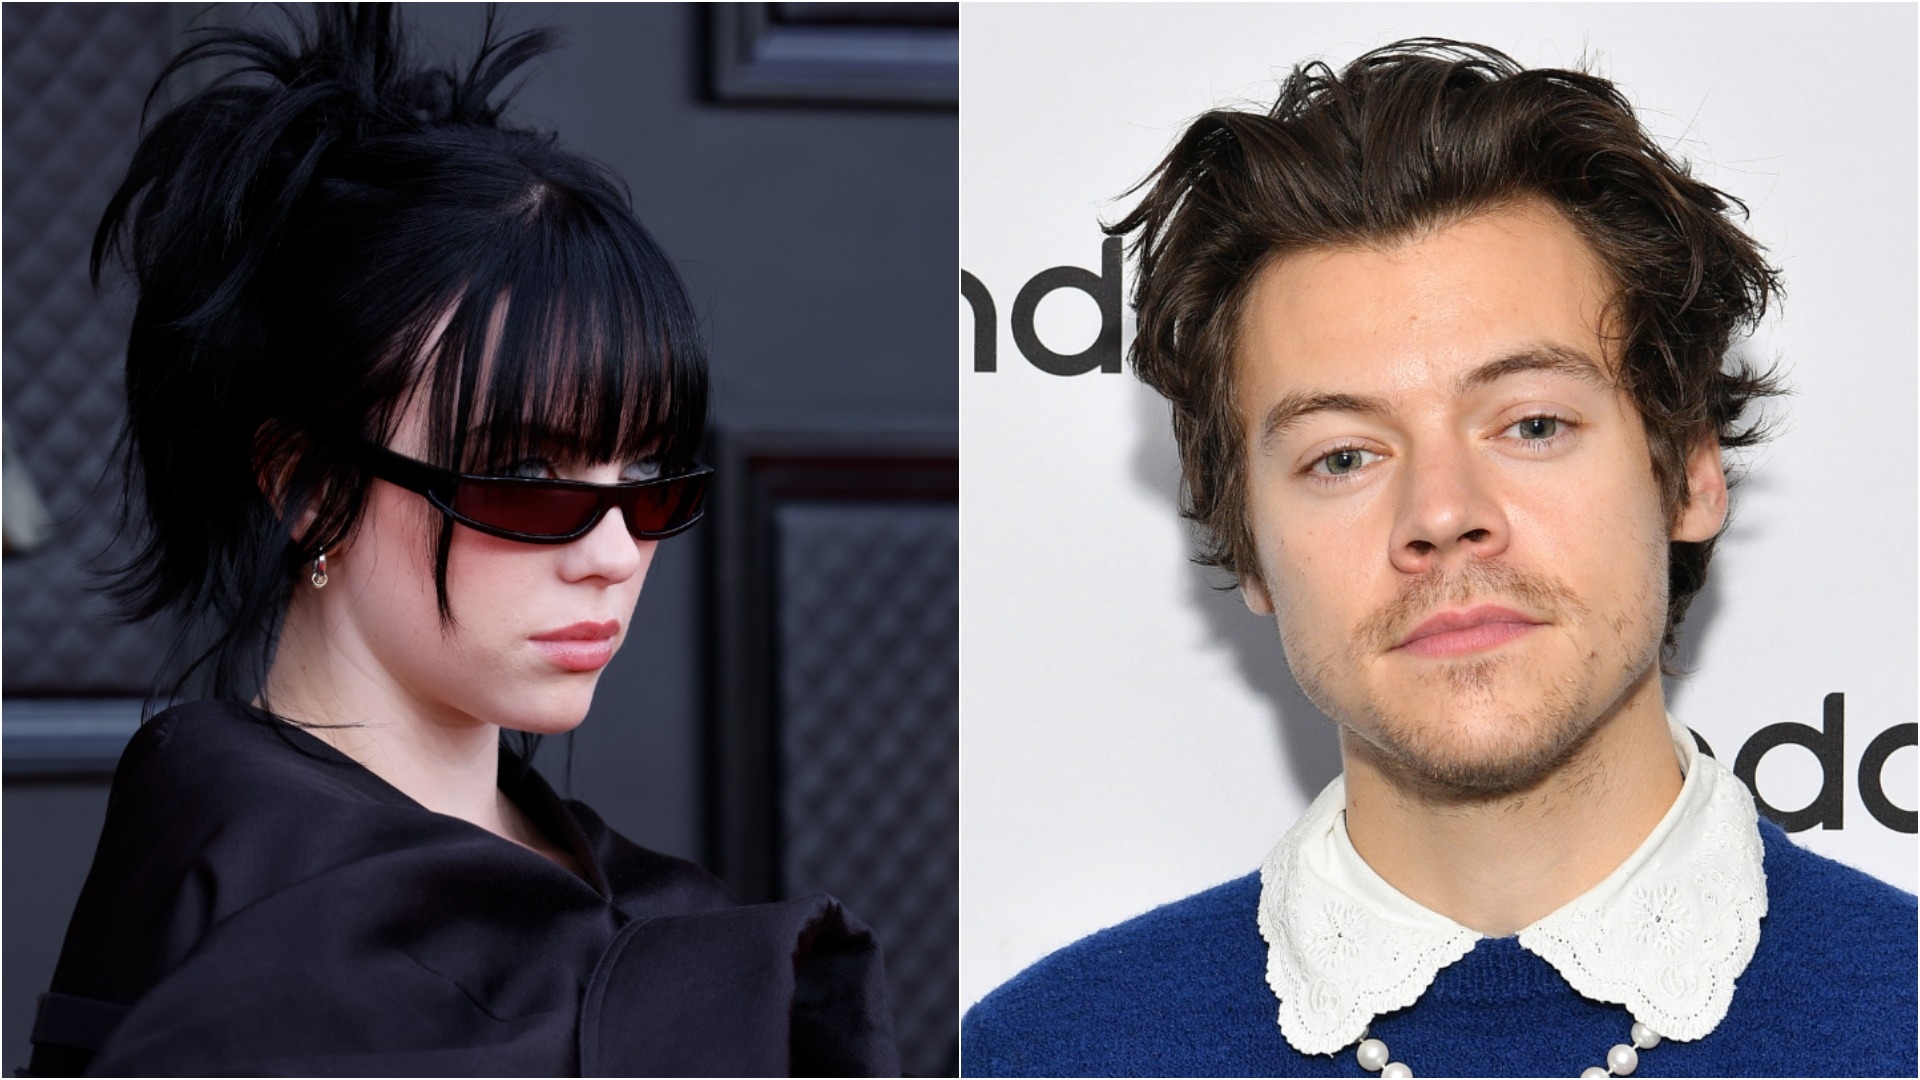 Harry Styles says Billie Eilish “broke the spell,” helped him come to terms with aging as an artist